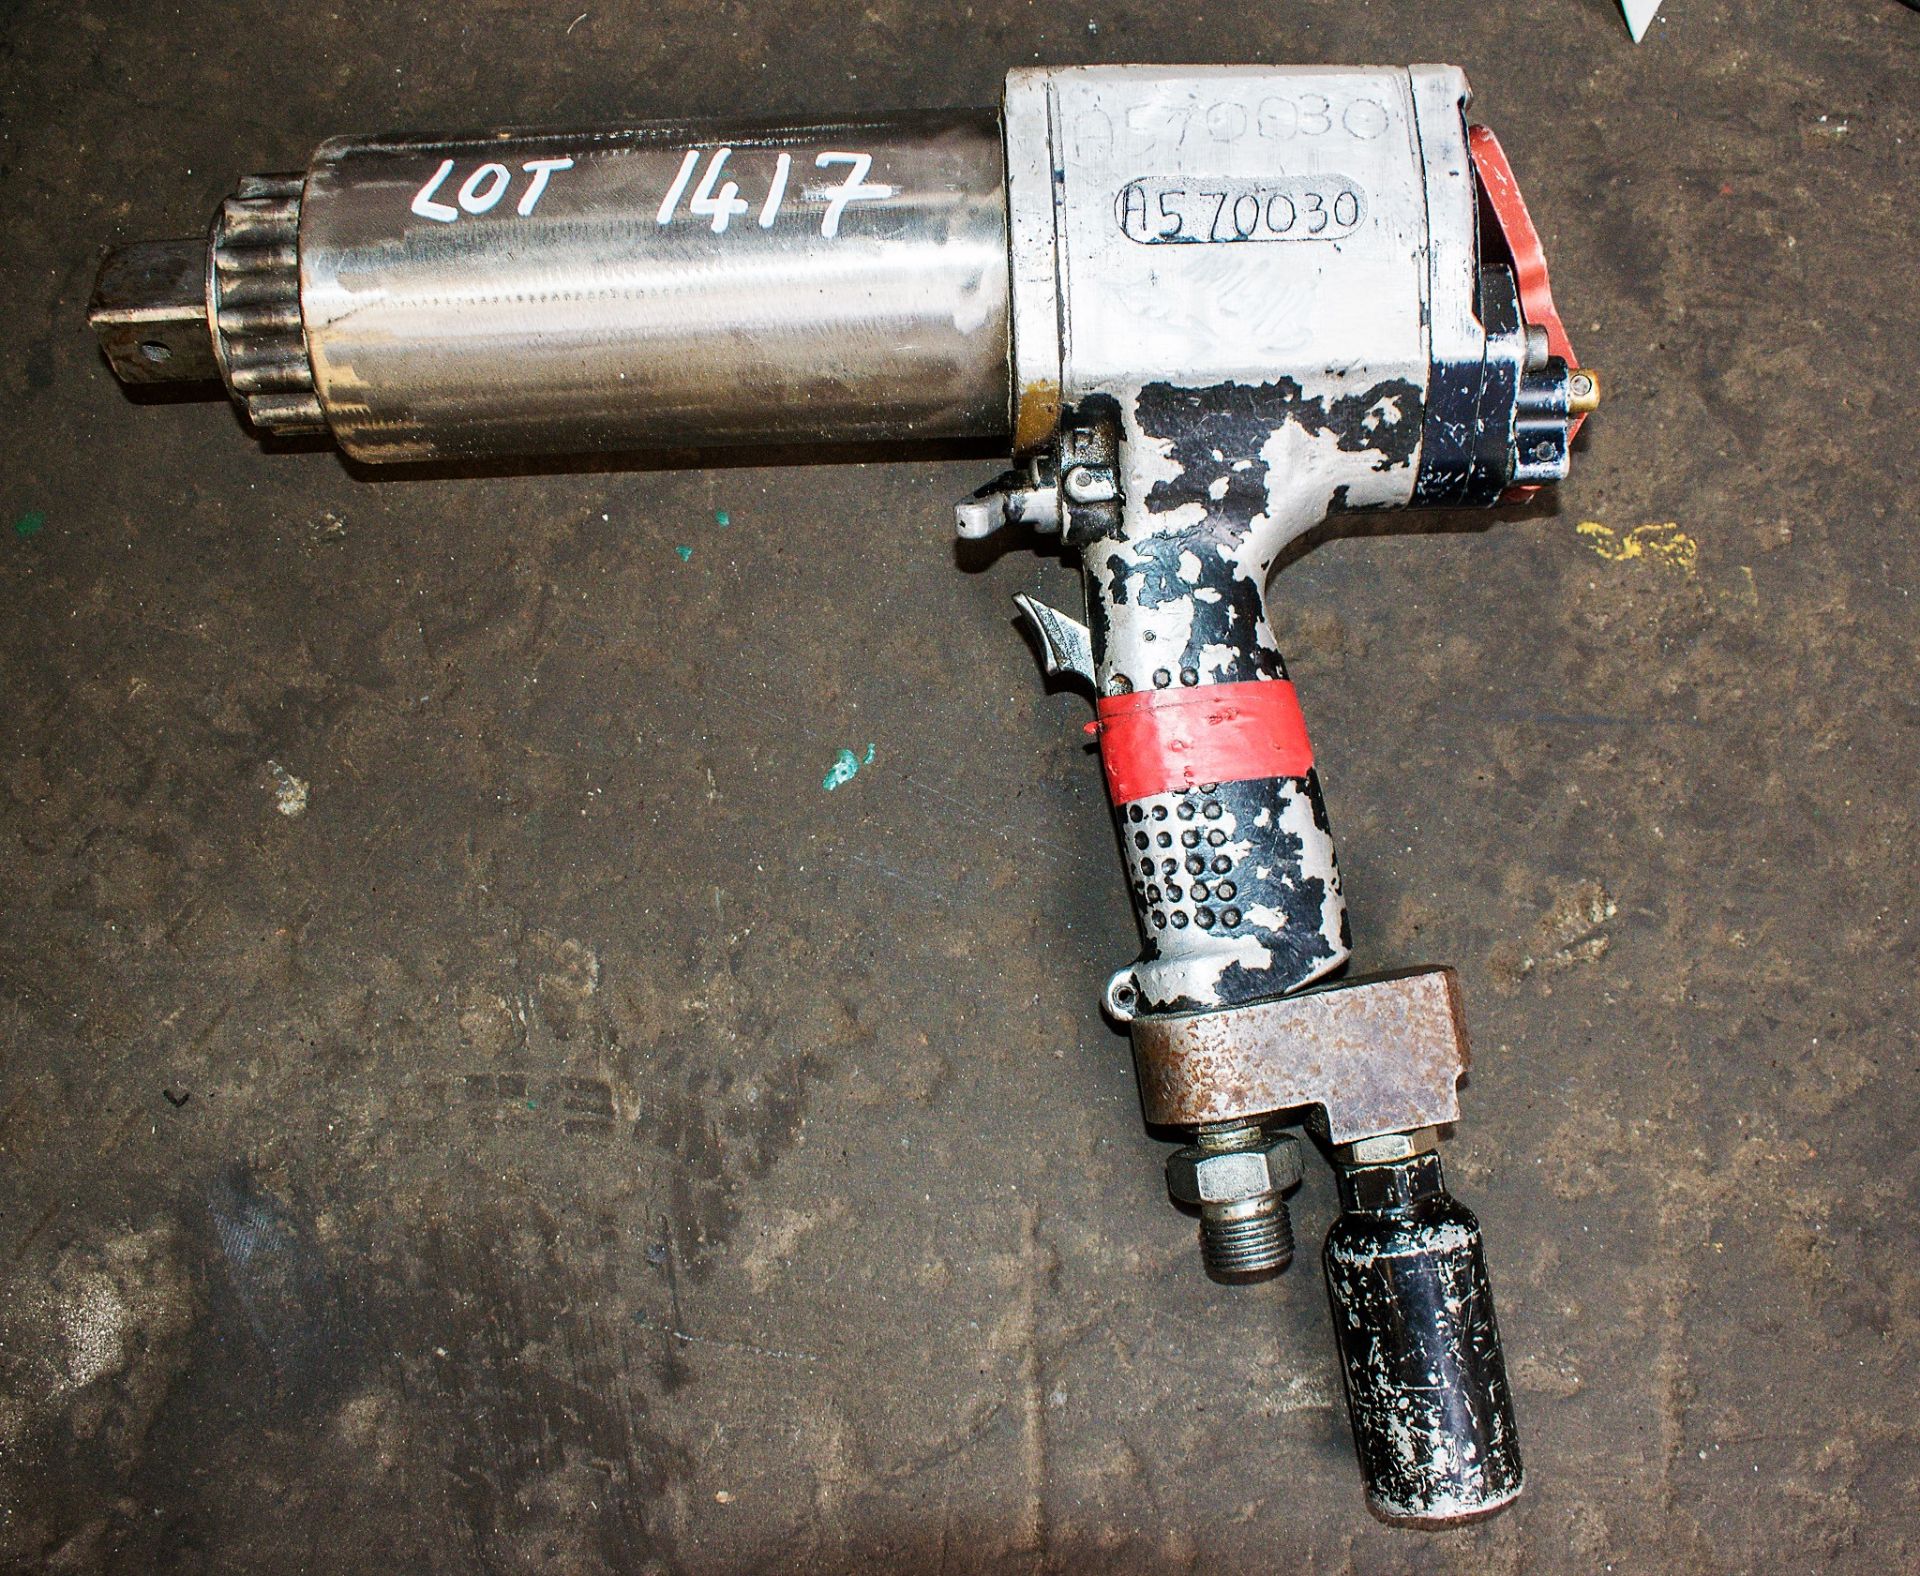 1 inch drive pneumatic impact wrench A570030 **No VAT charged on hammer, but VAT will be charged